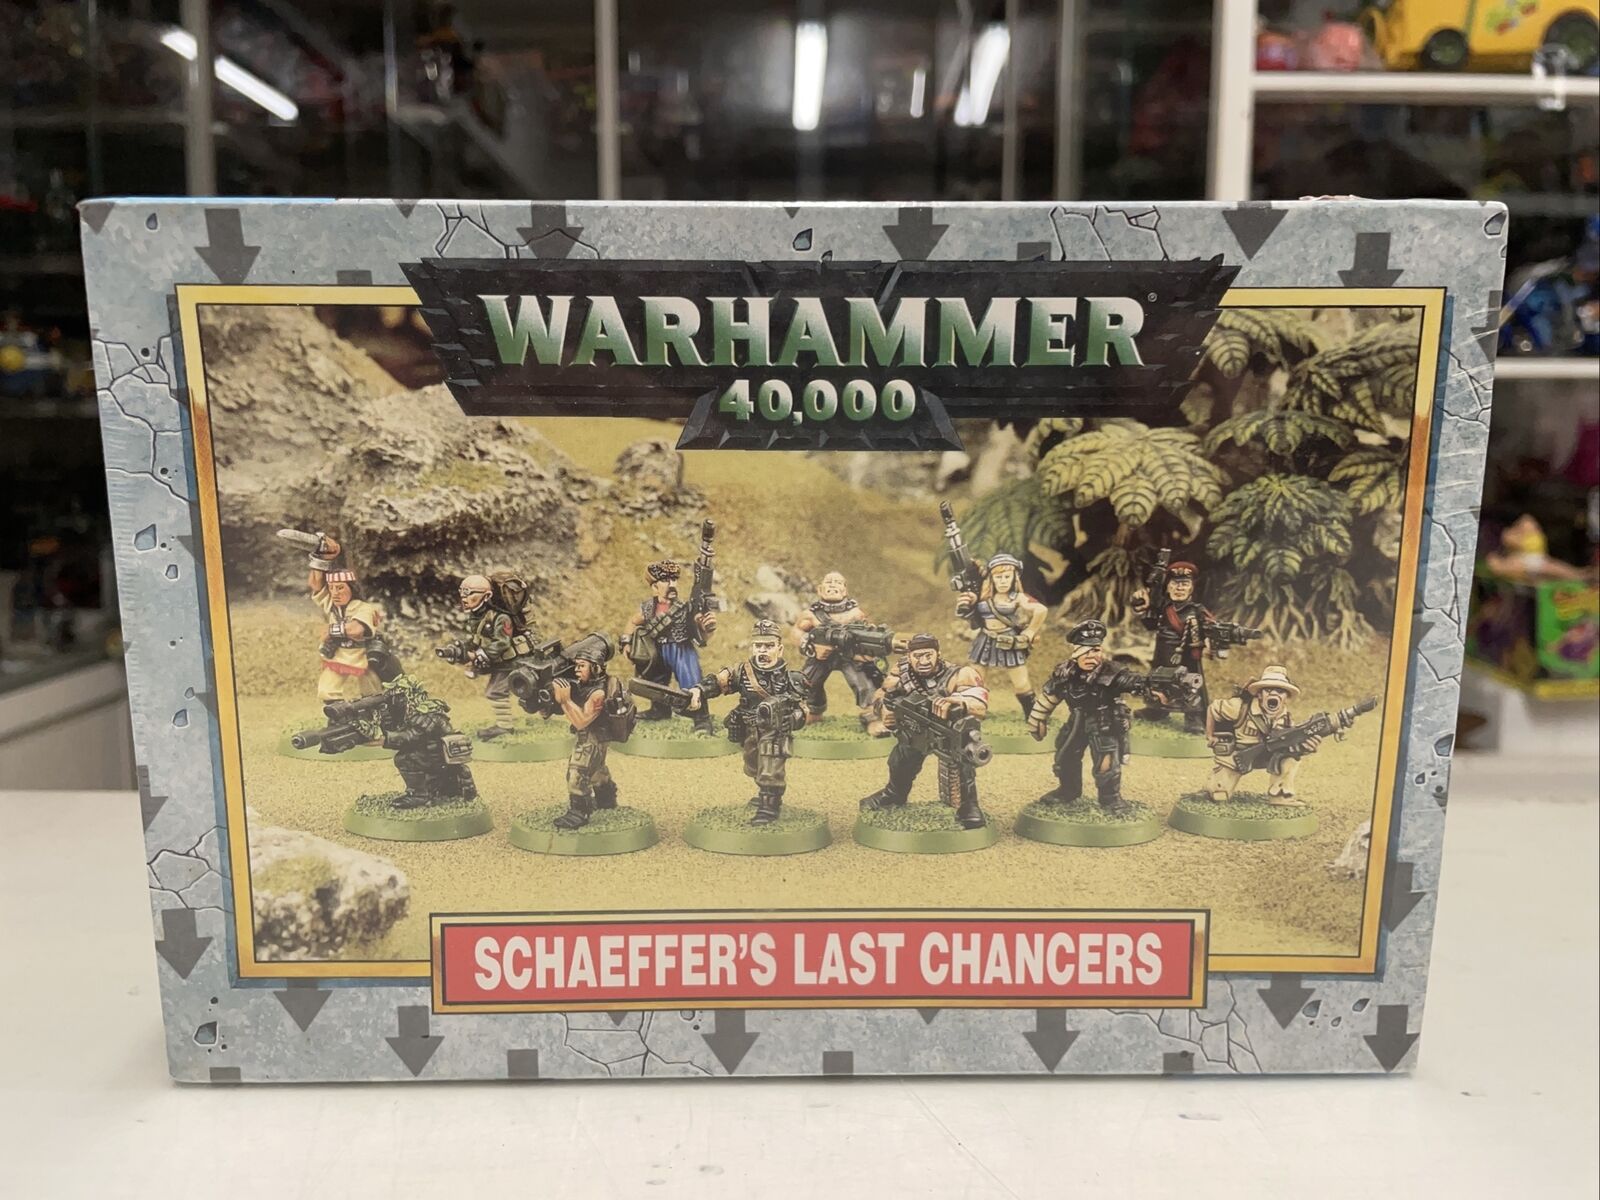 Schaeffers-Last-Chancers-Metal-NEW-In-Sealed-Box-Imperial-Guard-OLDHAMMER-144495972201